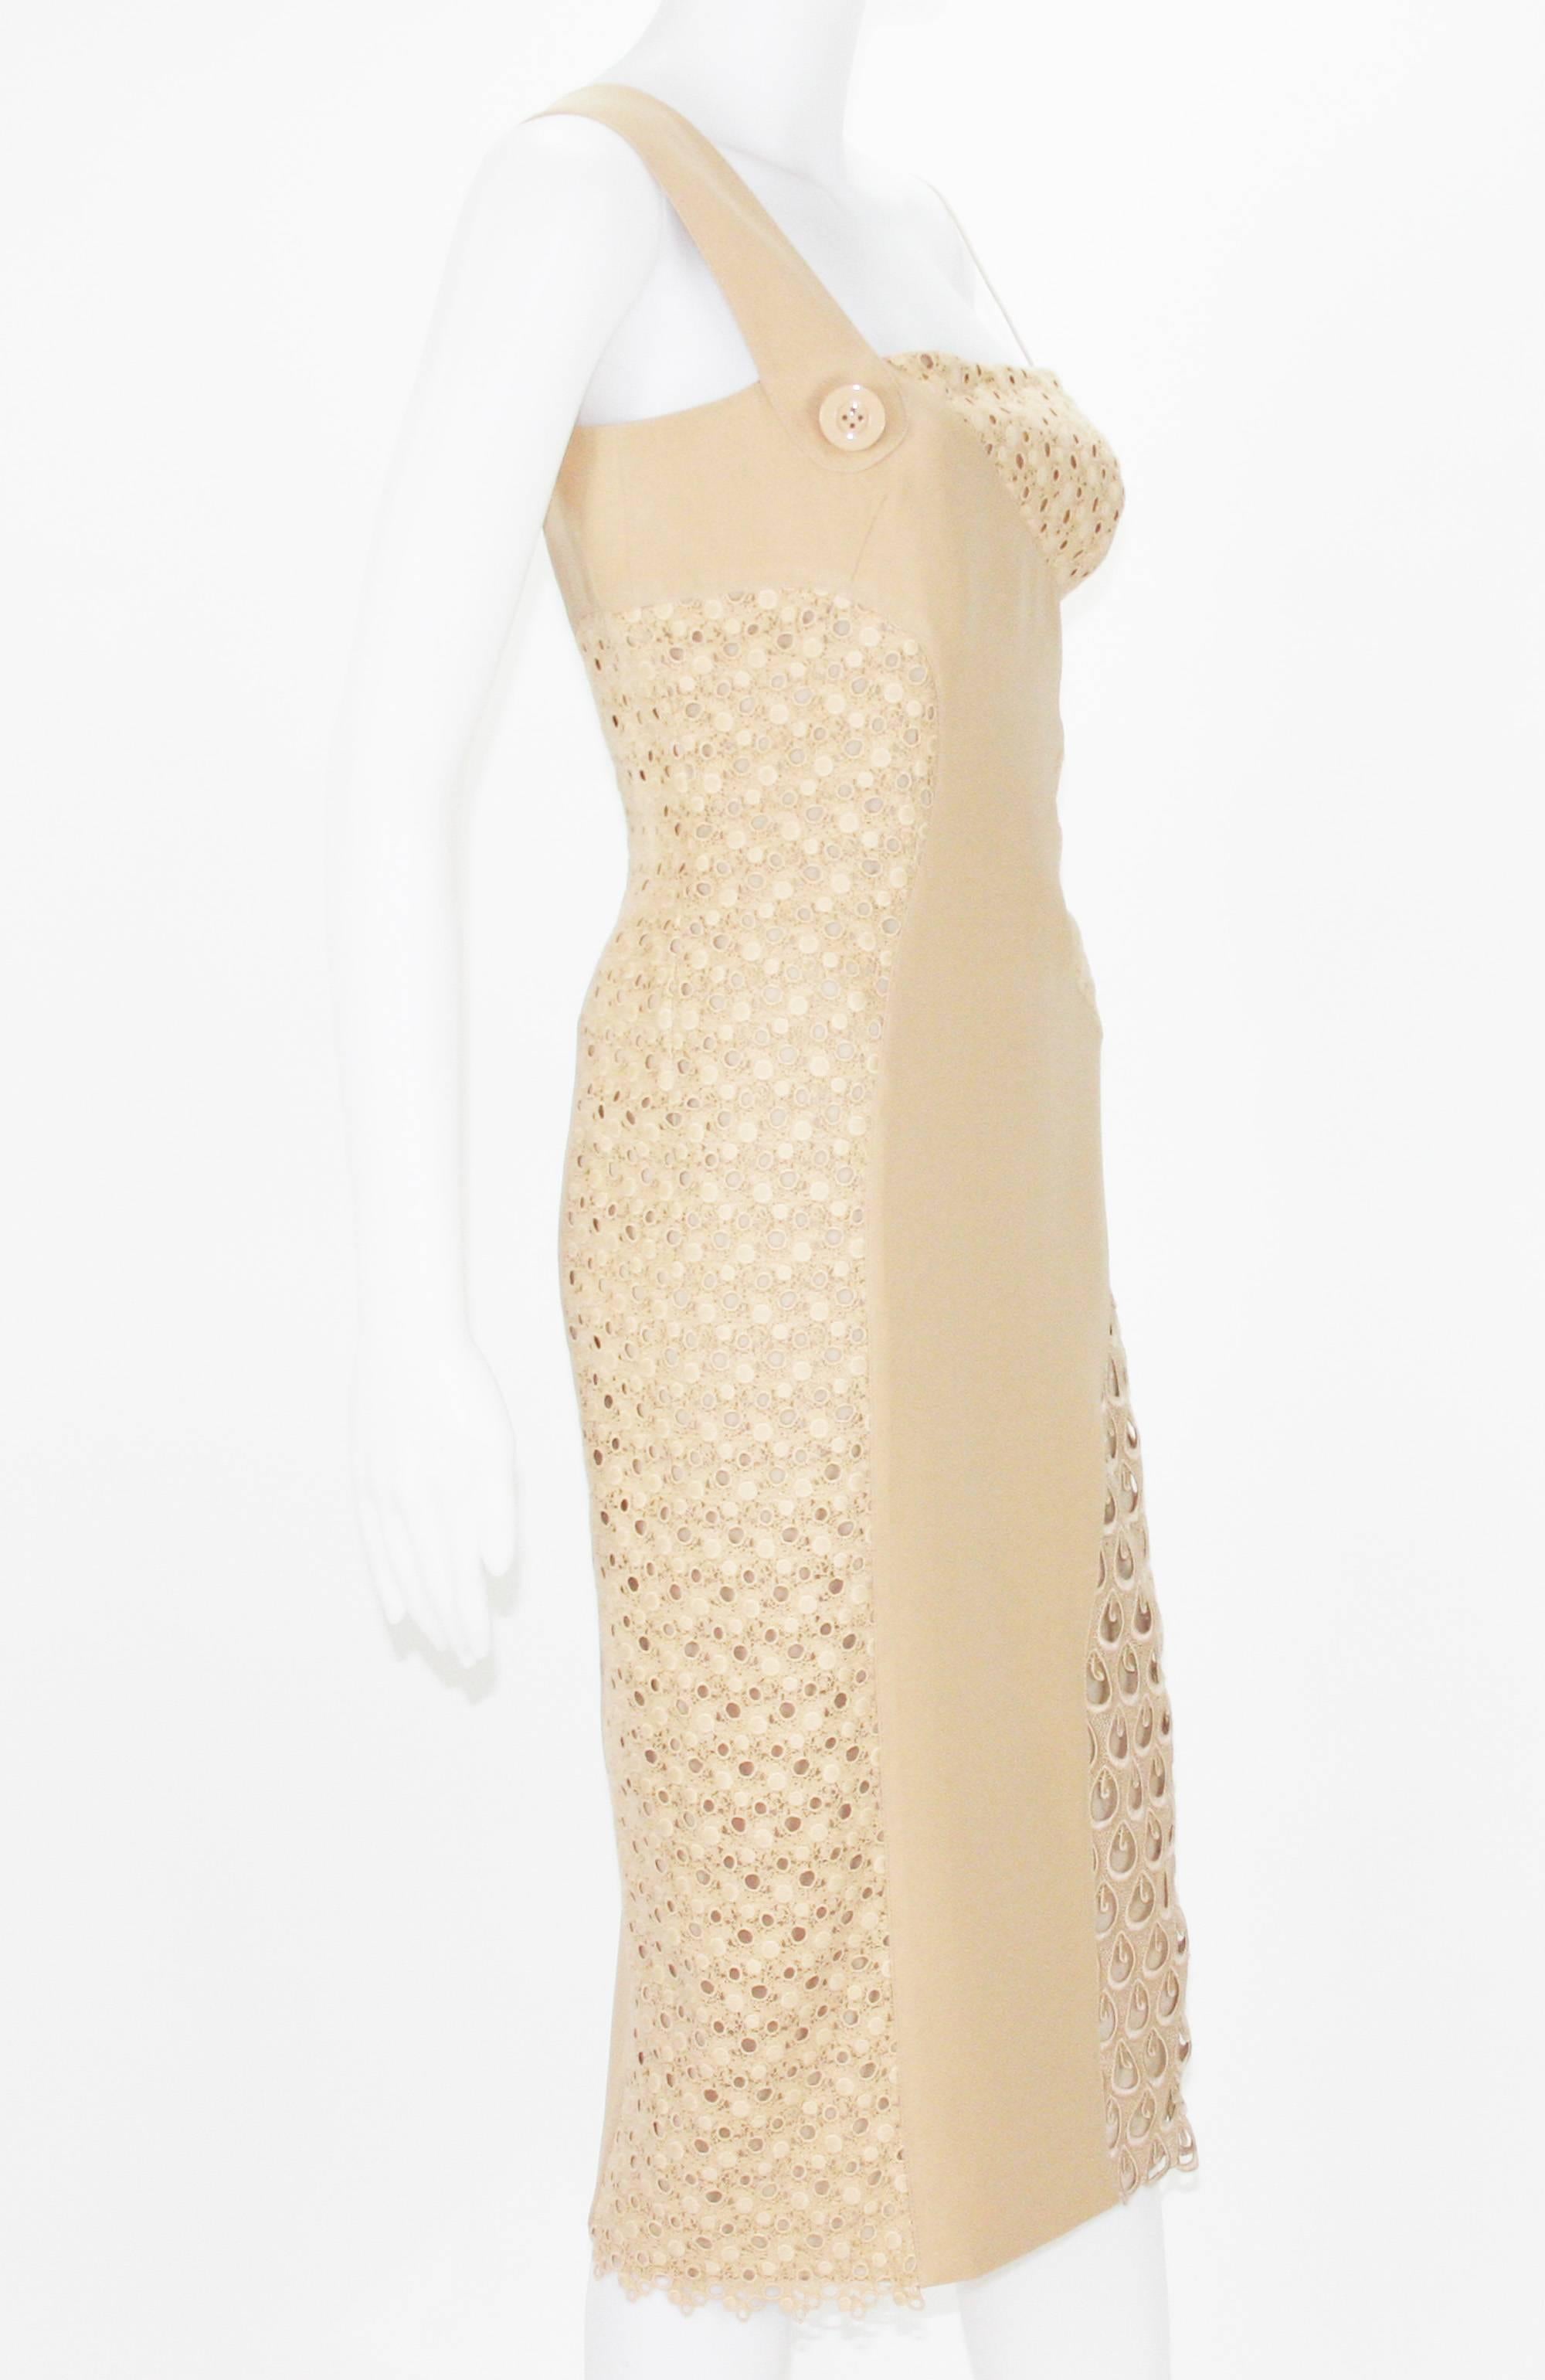 Versace's crocheted cotton and silk-cady one-shoulder dress in a wear-with-anything nude hue will make a striking addition to your party portfolio.
Team this textural runway piece with strappy sandals and elevate the look with a color-shock